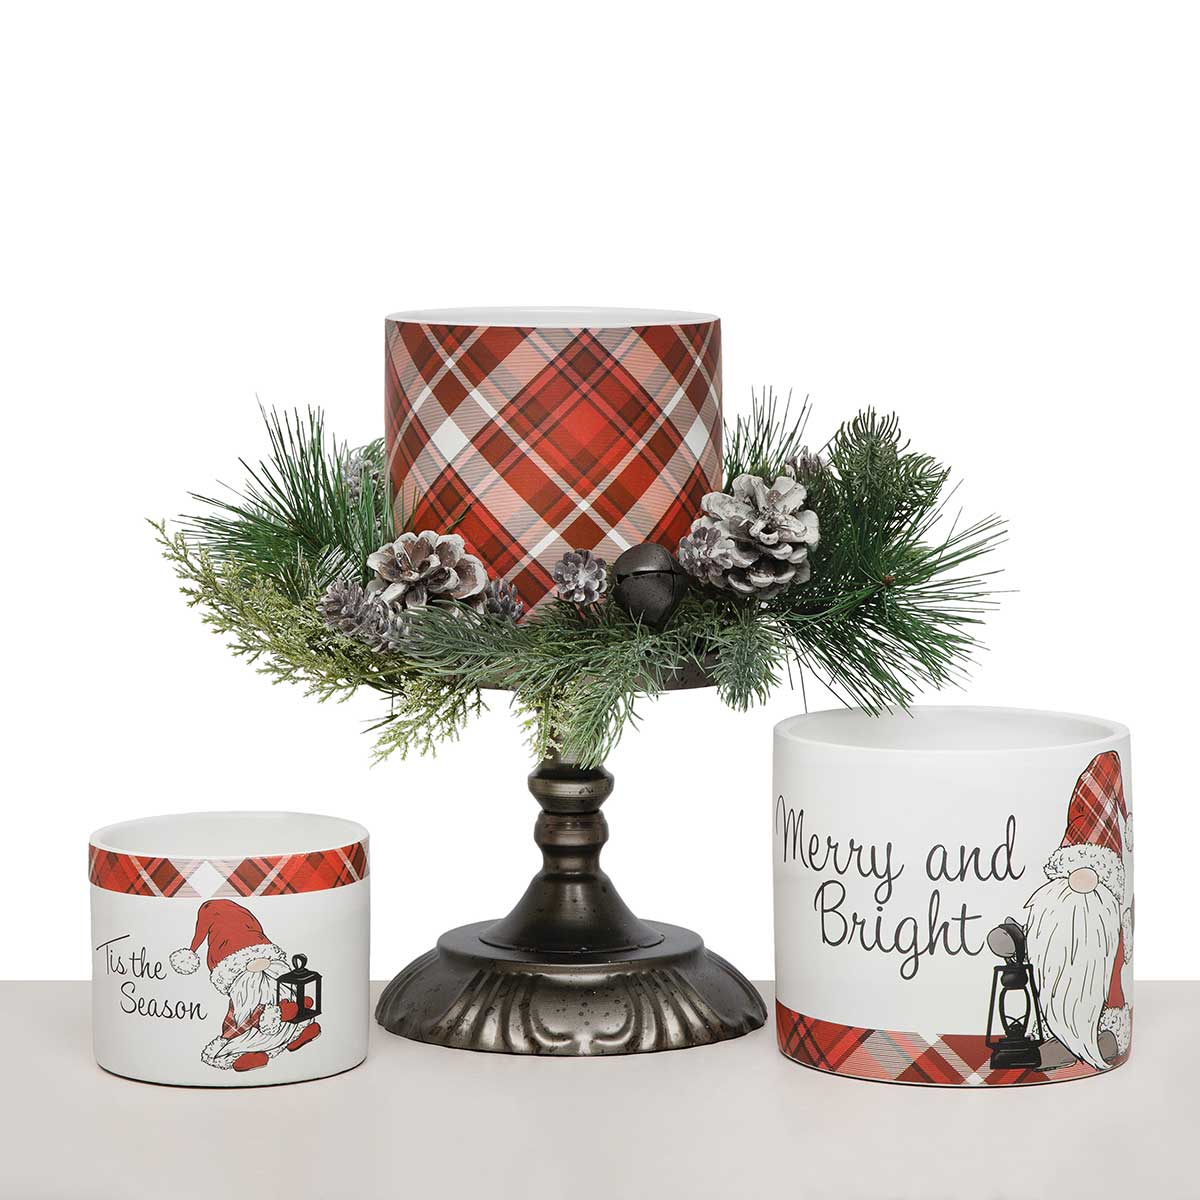 POT CHRISTMAS PLAID LARGE 5.25IN X 4.75IN CERAMIC - Click Image to Close